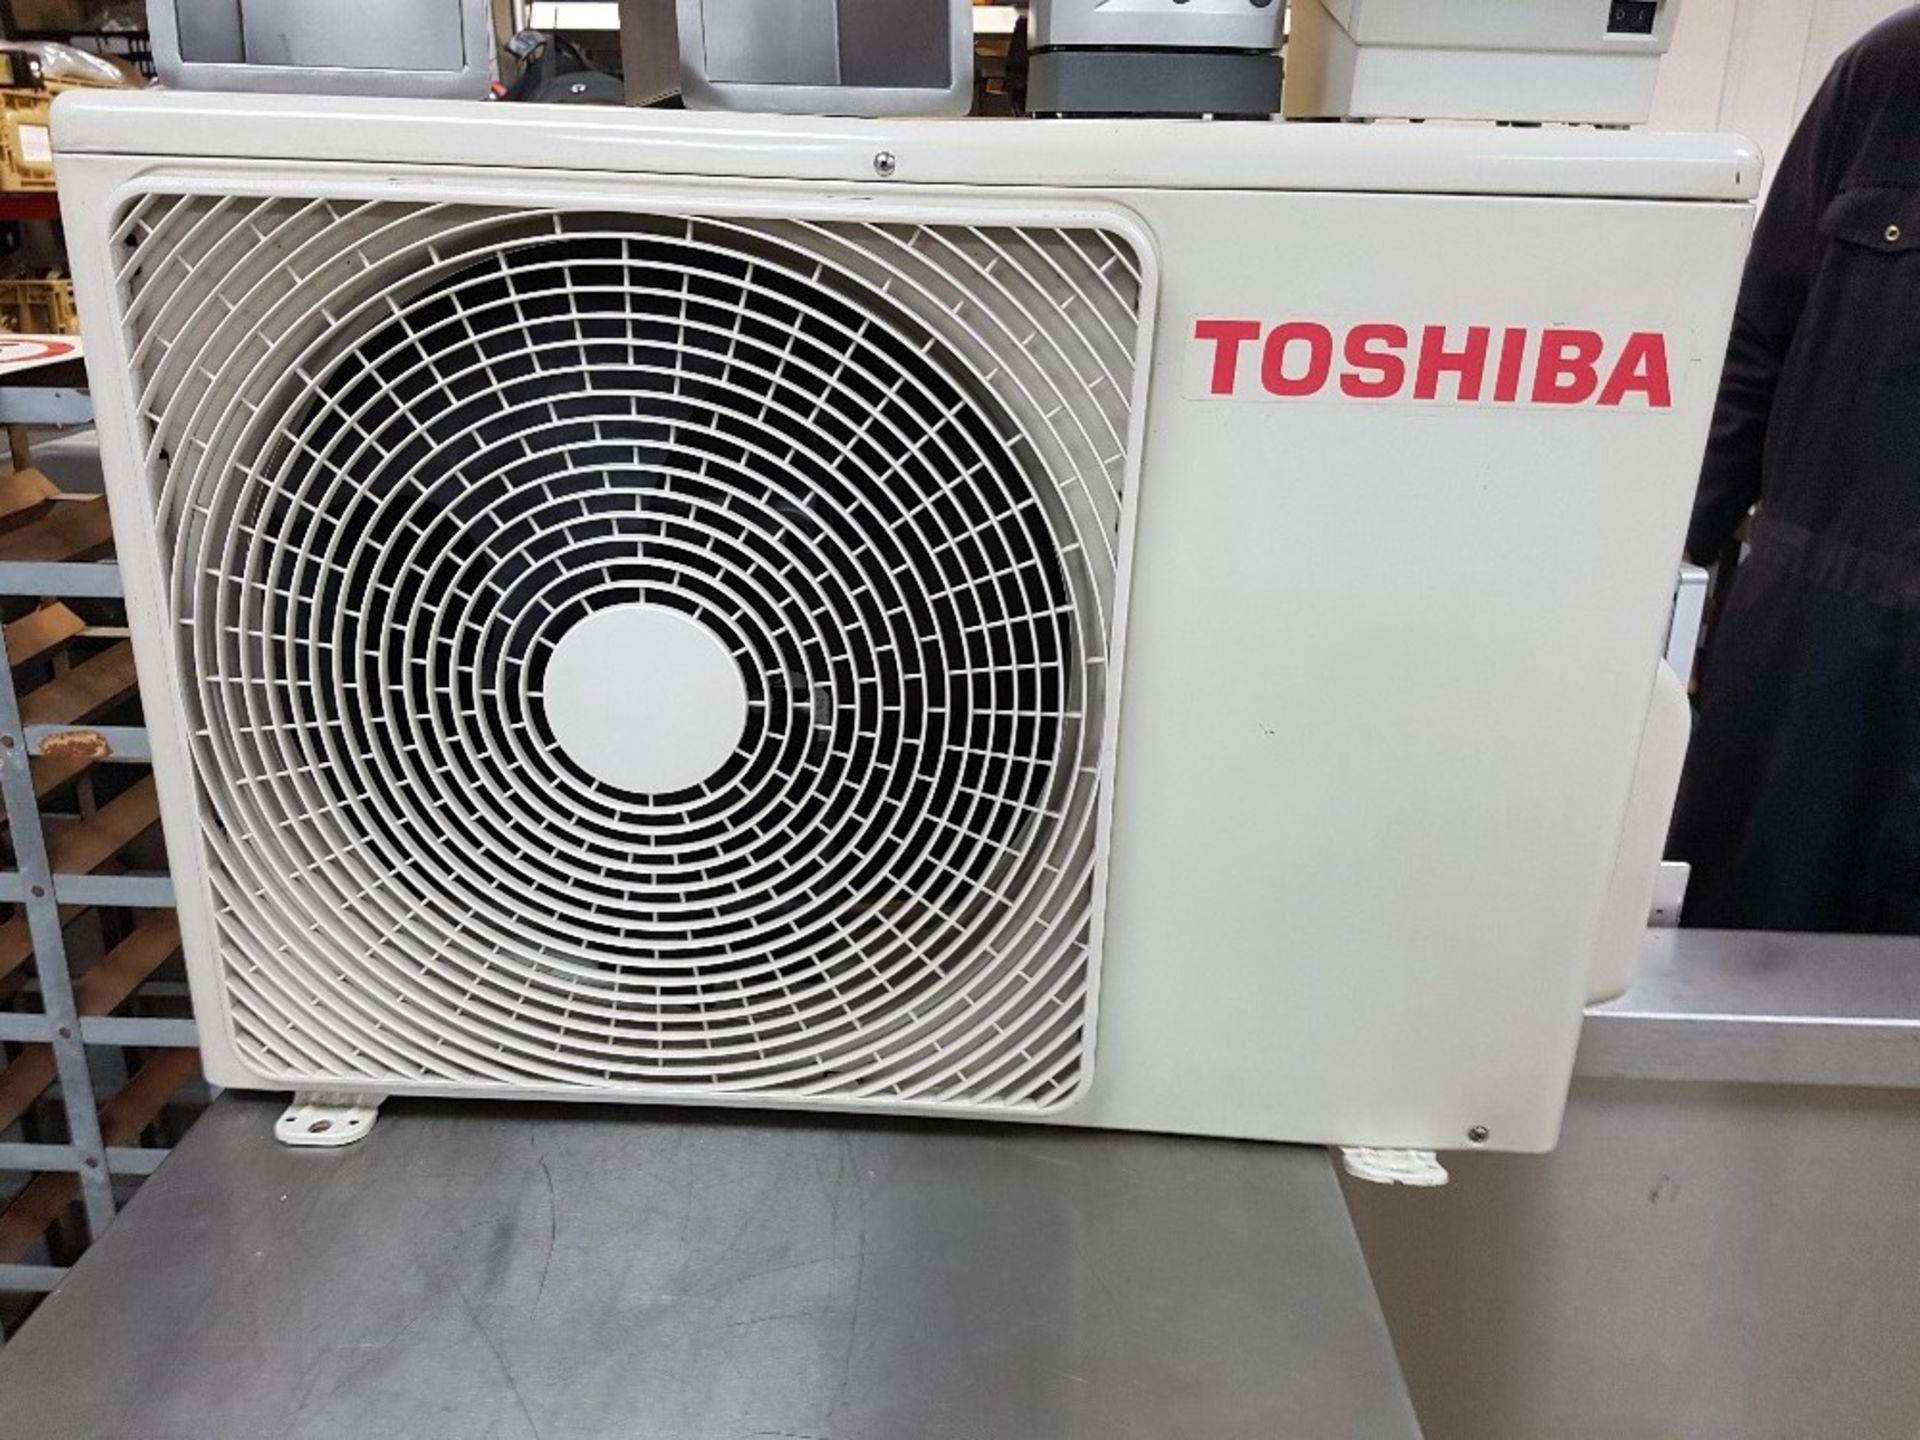 Toshiba Complete Air Conditioning Unit